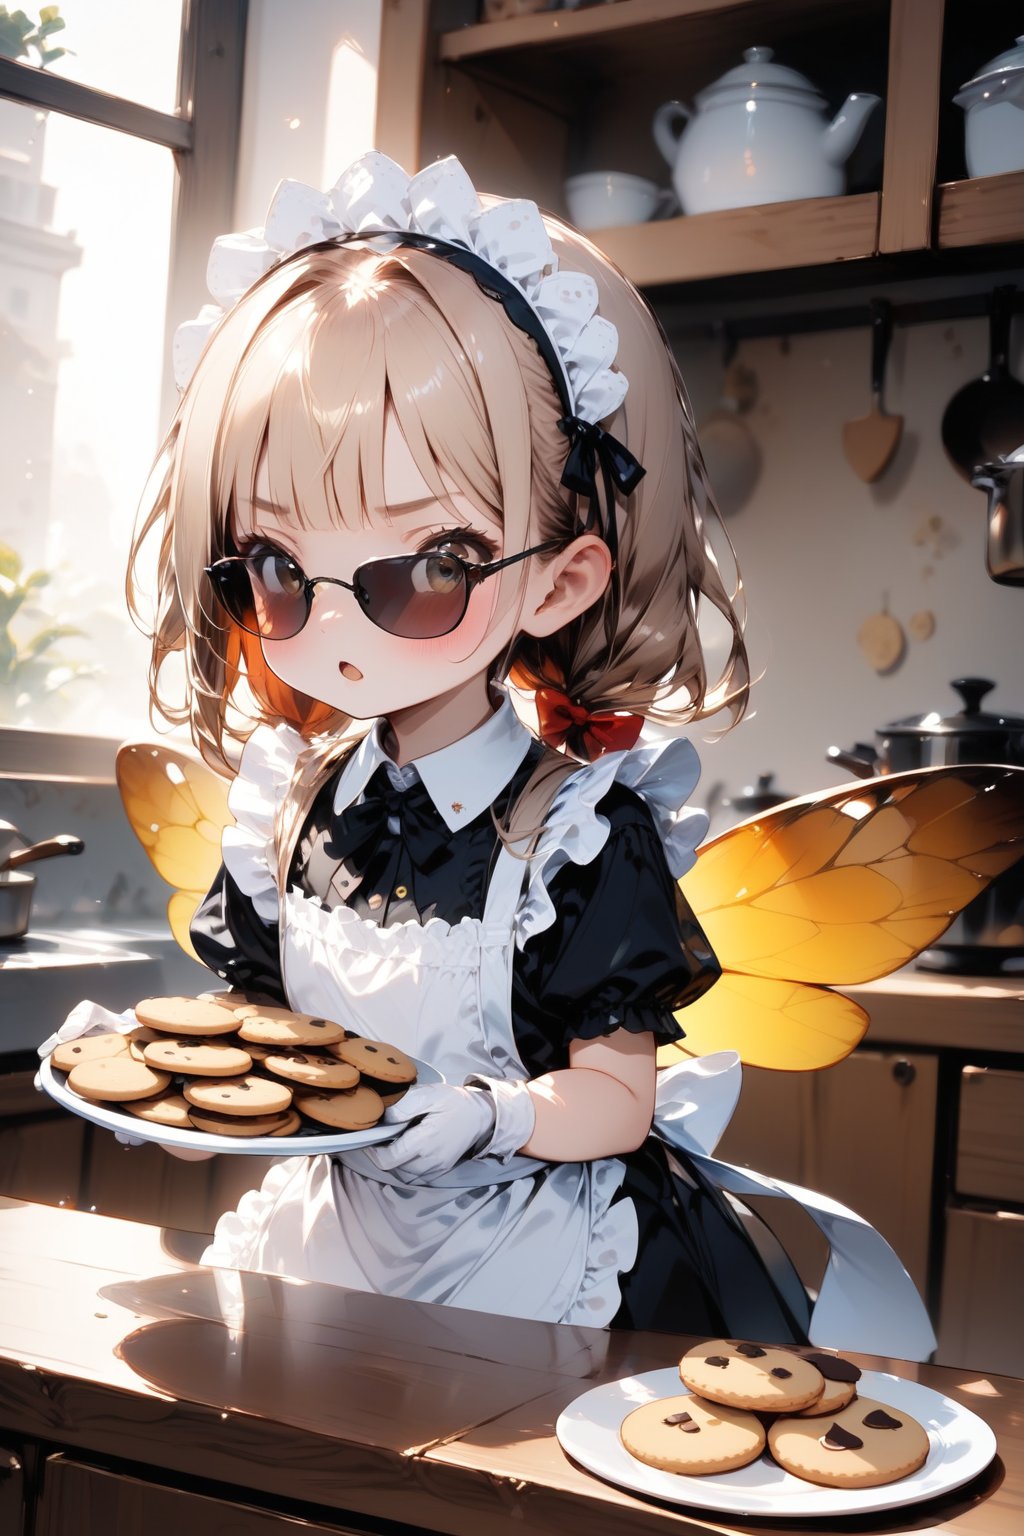 //quality, masterpiece:1.4, detailed:1.4, best quality:1.4,//,1girl,solo,loli,//,(yellow hair),(long hair),blunt bangs,//,(bee_wings), (sunglasses),(spades_symbols),bow,maid headband,white maid_costume,white gloves,//,blush,mouth_open,serious,//,(holding a dish of cookies),//,indoors,kitchen,Deformed,agtsg,sunglasses,Details,Detailed Masterpiece,